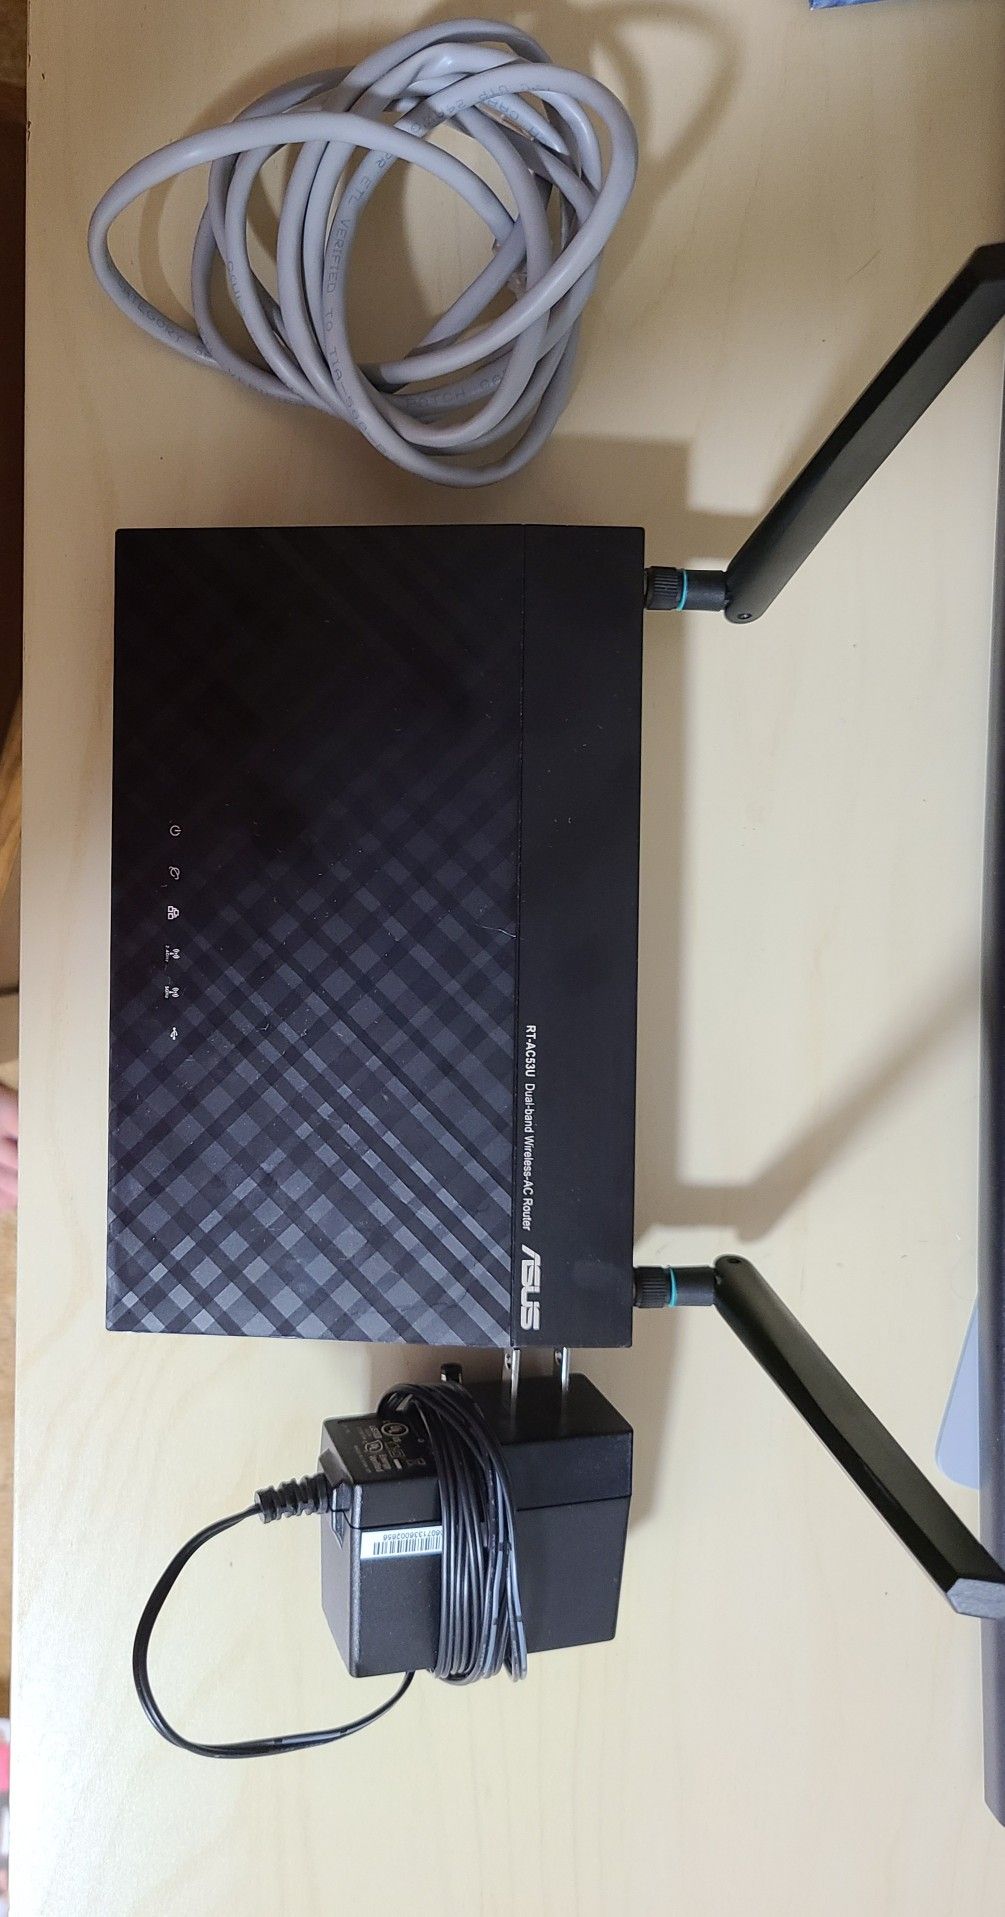 Asus WI-FI Router model RT-AC53U